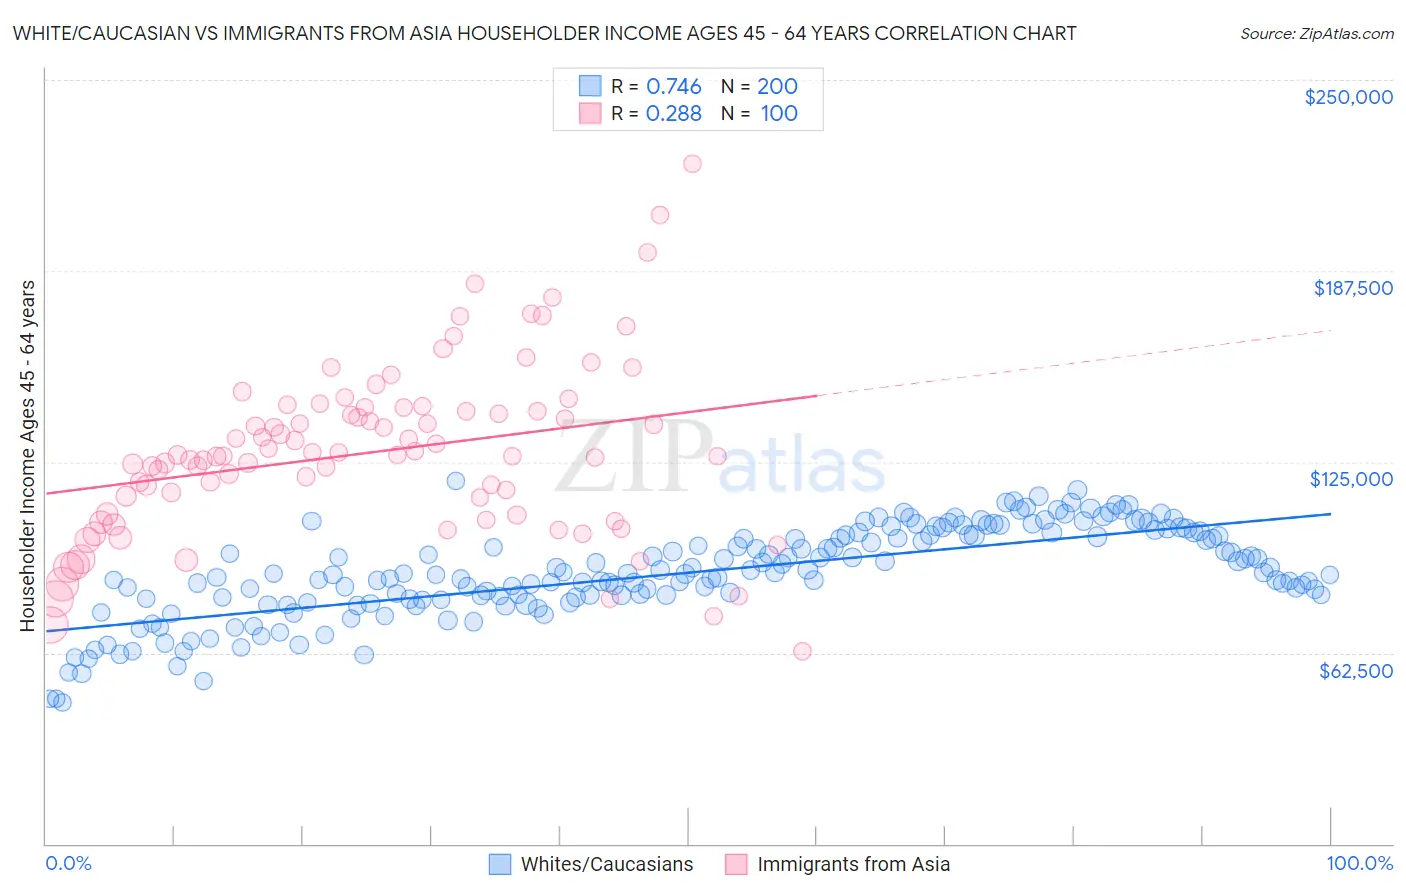 White/Caucasian vs Immigrants from Asia Householder Income Ages 45 - 64 years